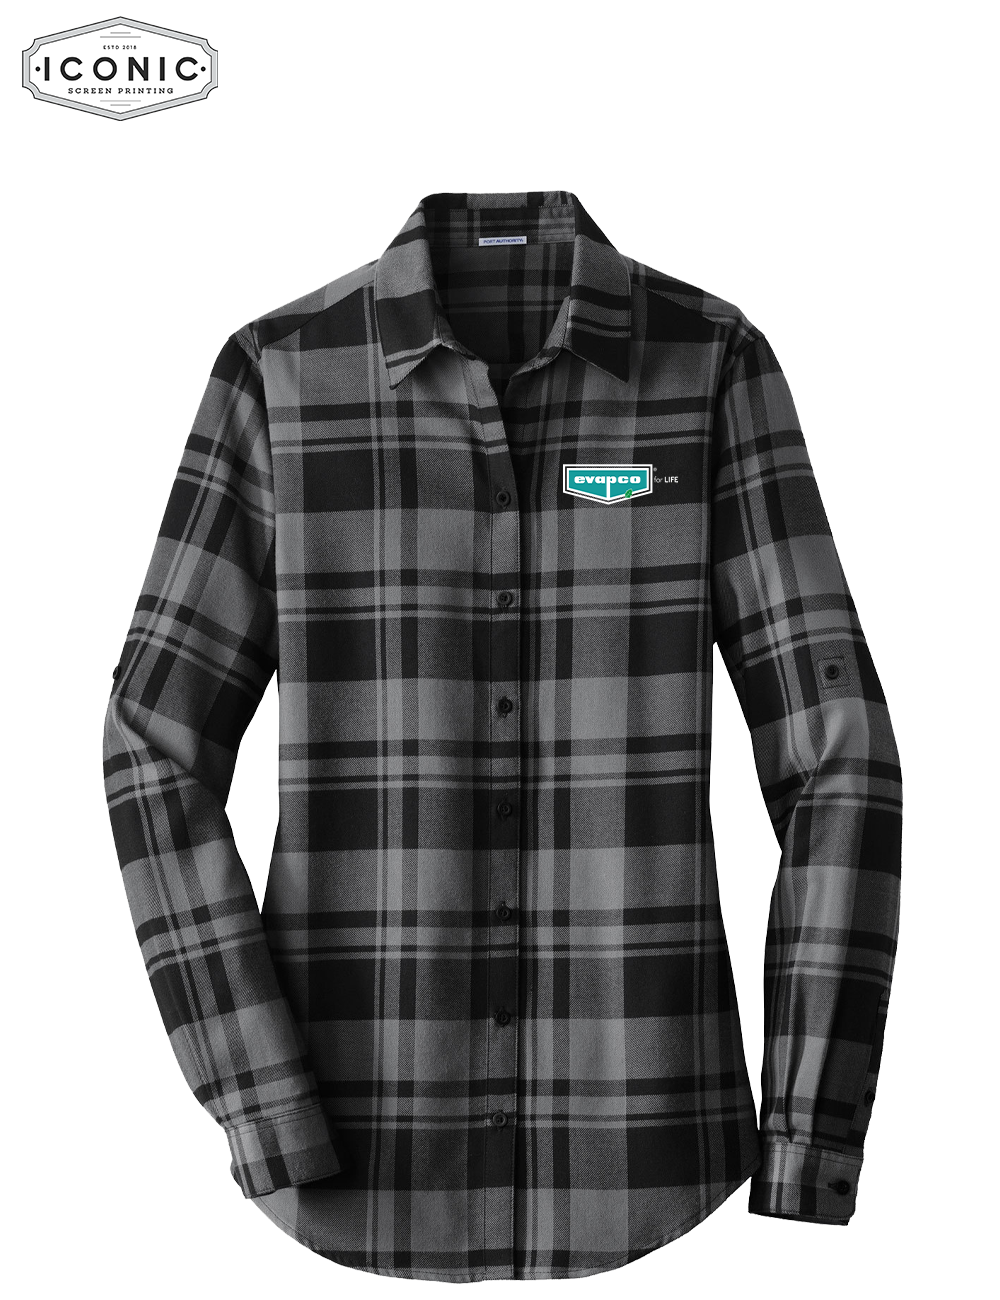 Evapco for Life - Ladies Plaid Flannel Tunic - Embroidery